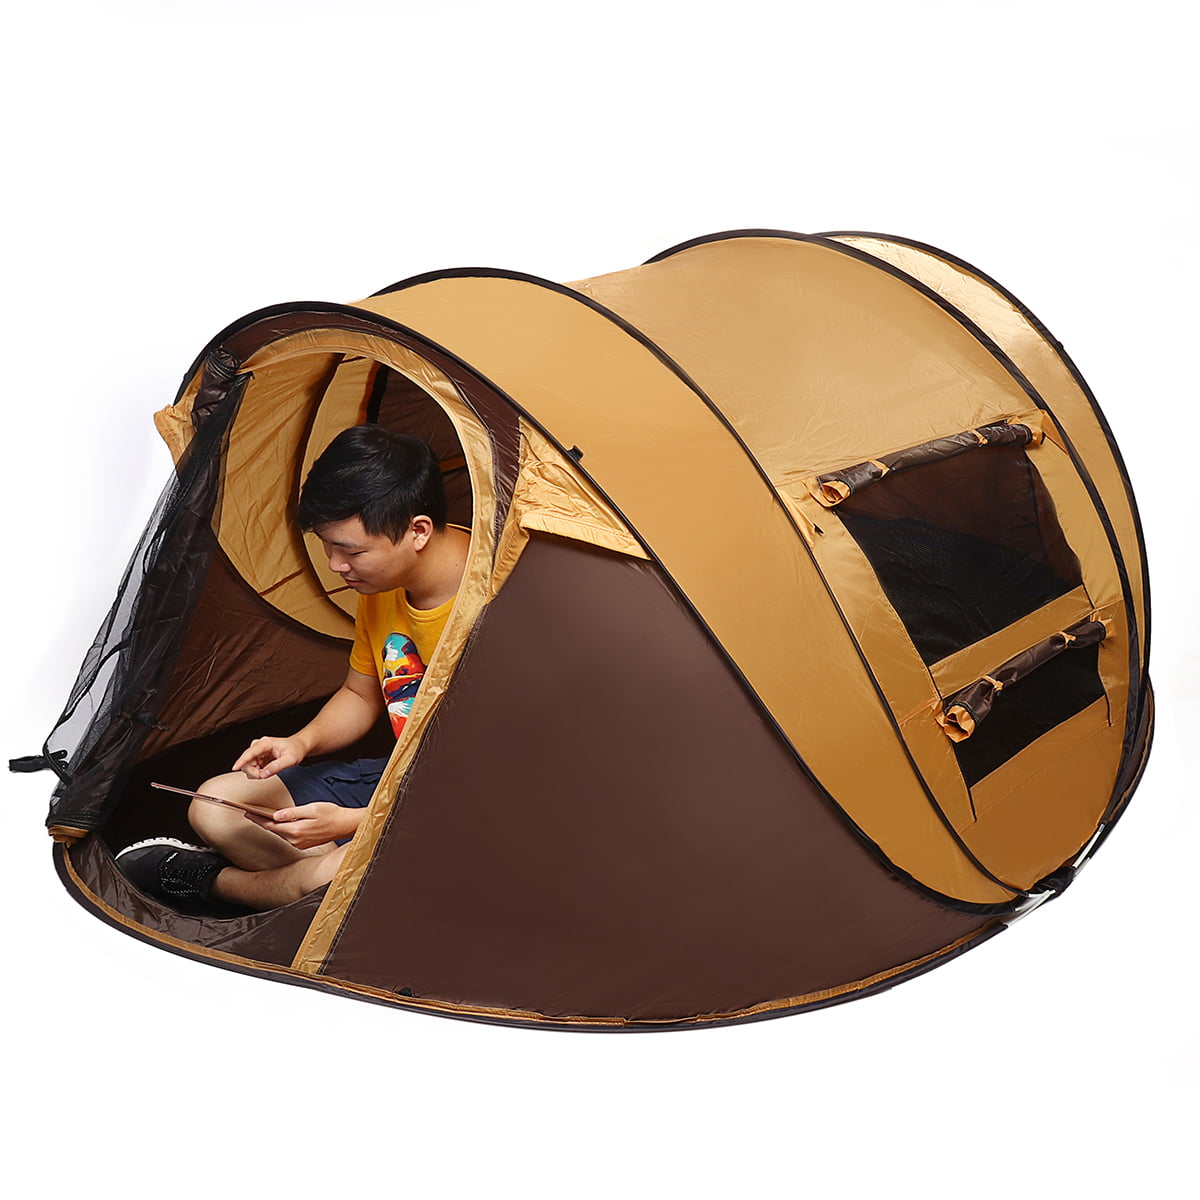 Backyard Top Window Beach Backpacking 2 Mesh Windows Traveling ,Baby Family Privacy Automatic Sun Shelter for Outdoor G4Free Pop up Tents 3-4 Person UV Protection,Ventilated 2 Doors Hiking